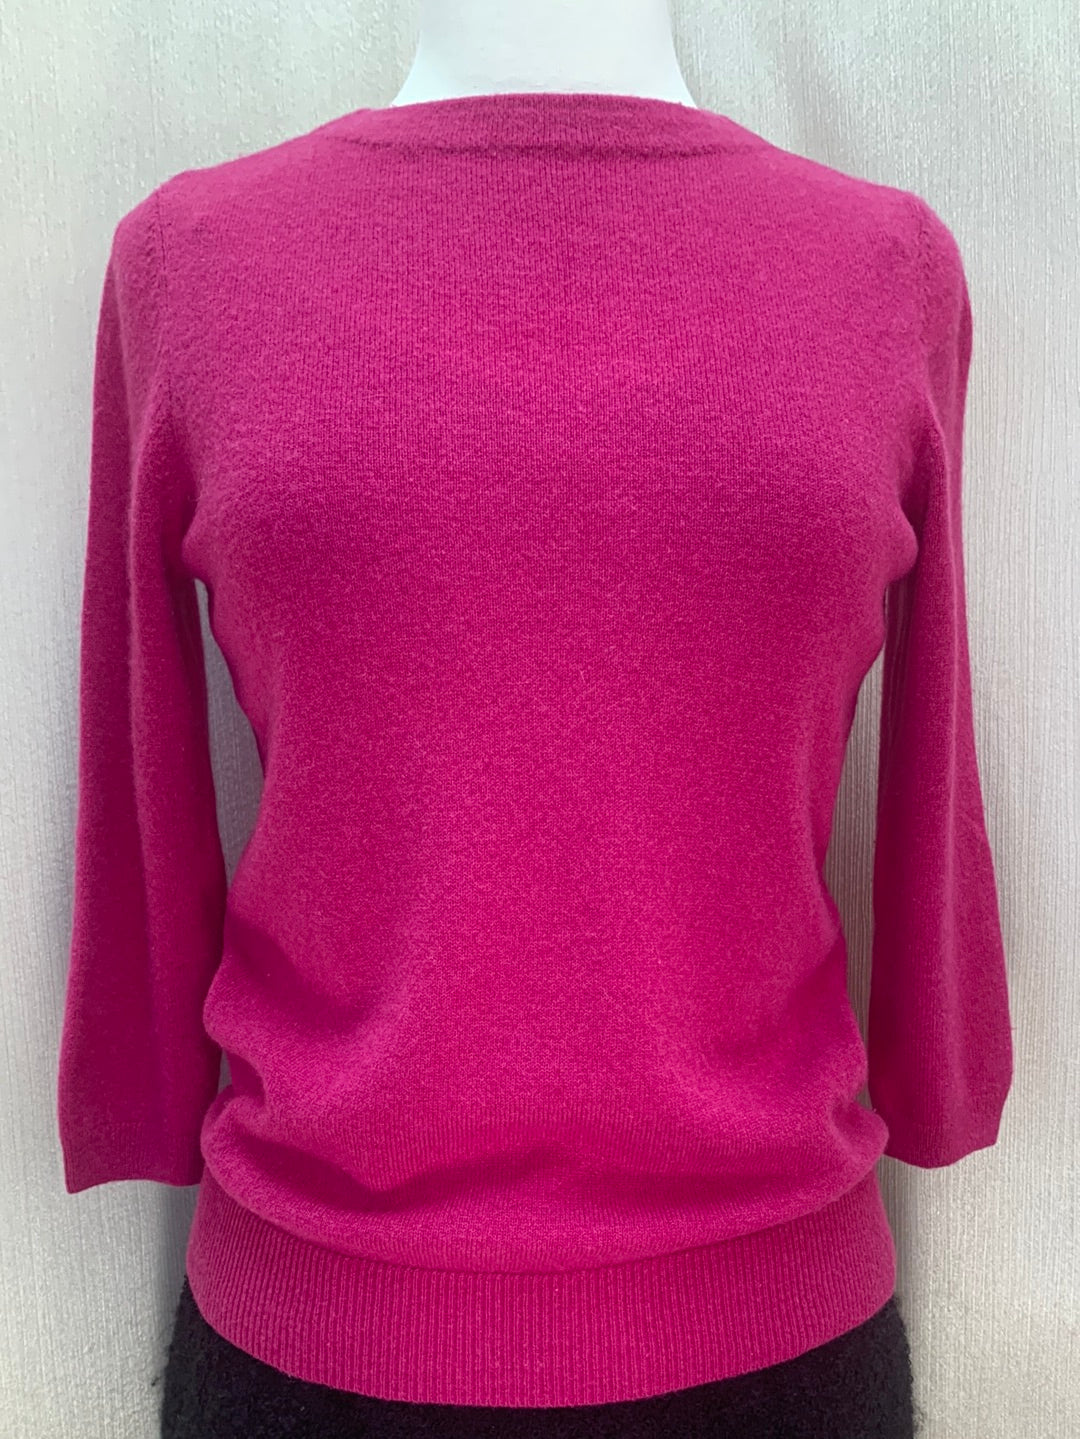 TALBOTS berry pink Cashmere 3/4 Sleeve Sweater - SP